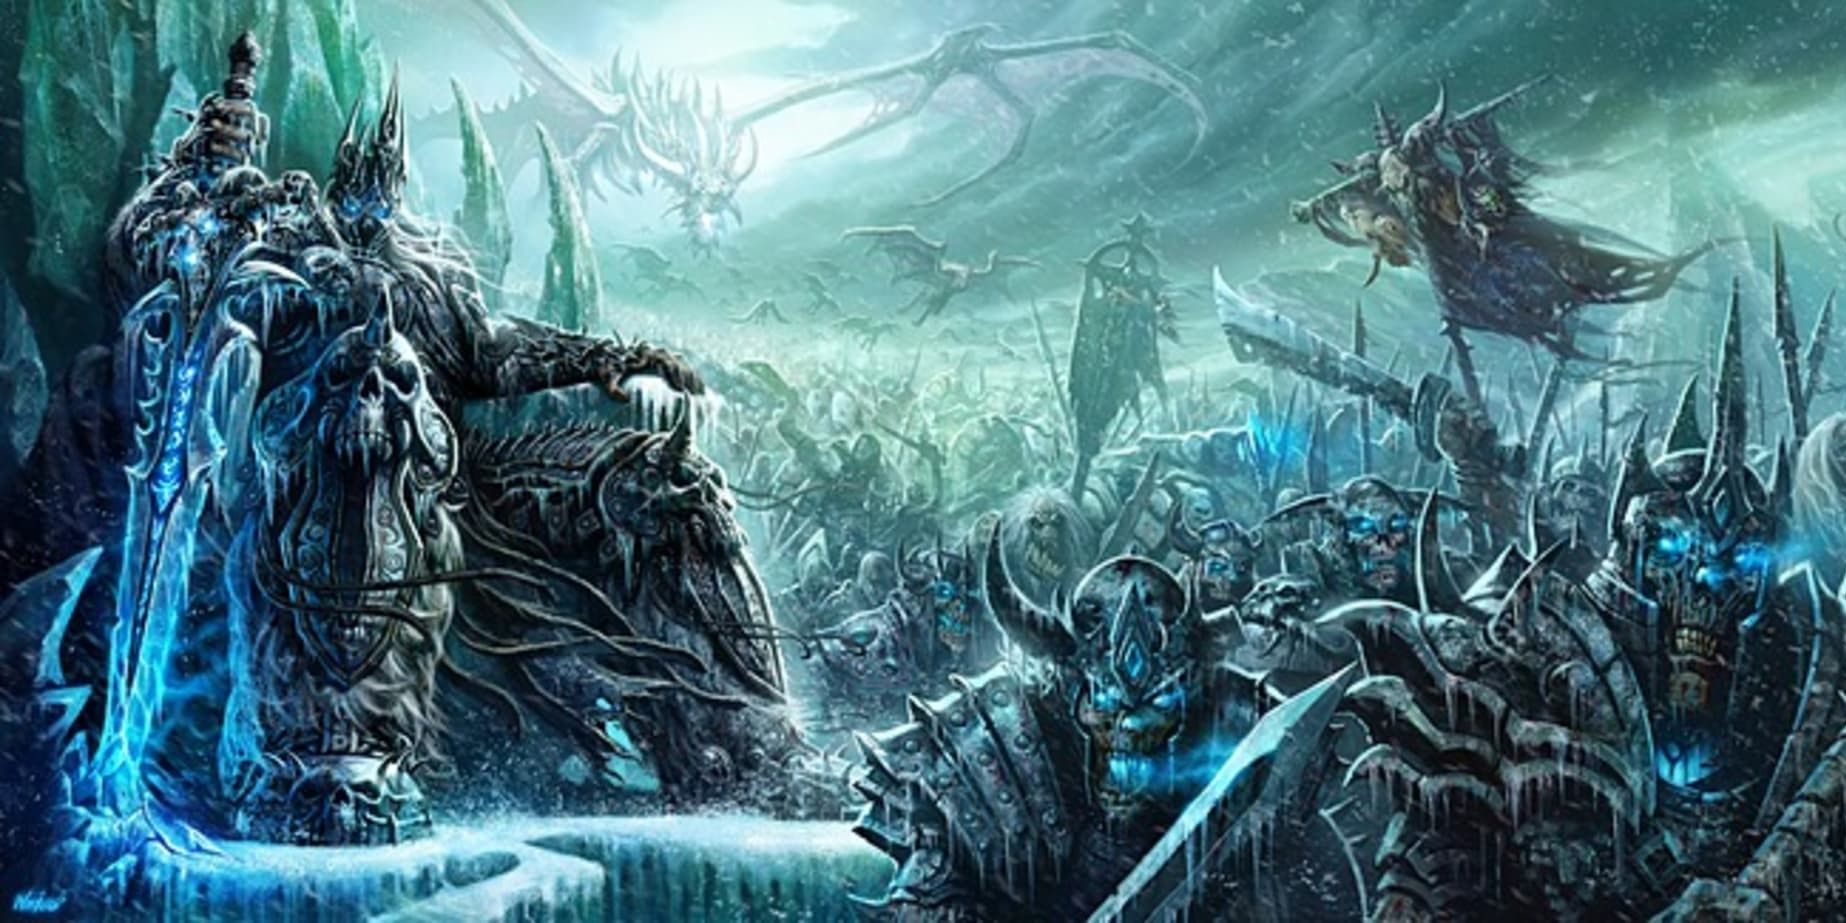 Hearthstone Death Knight on a throne surrounded by warriors and a dragon in the sky.